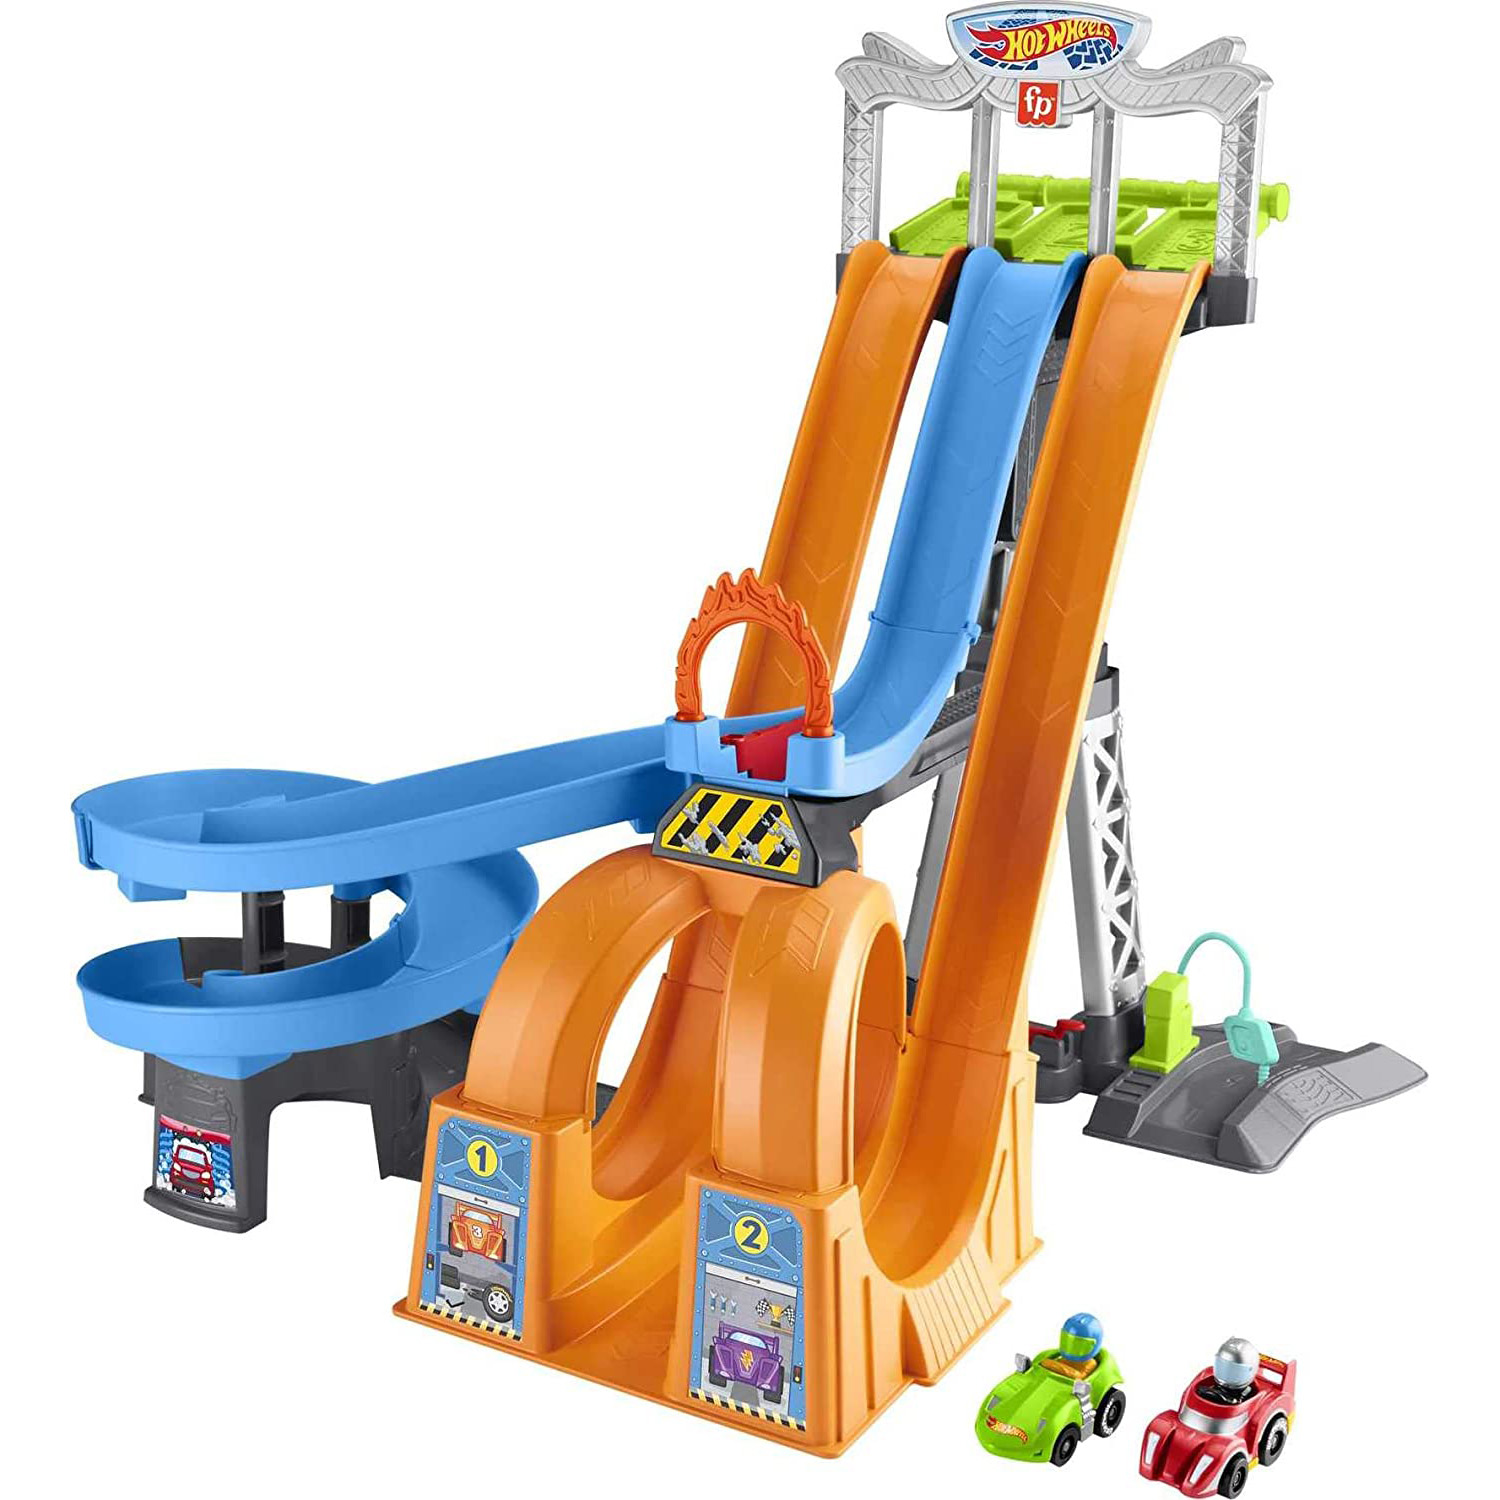 Pautas bota tragedia Fisher-Price Hot Wheels Racing Loops Tower by Little People, Vehicle  playset with Racetrack - Sawesome Toys